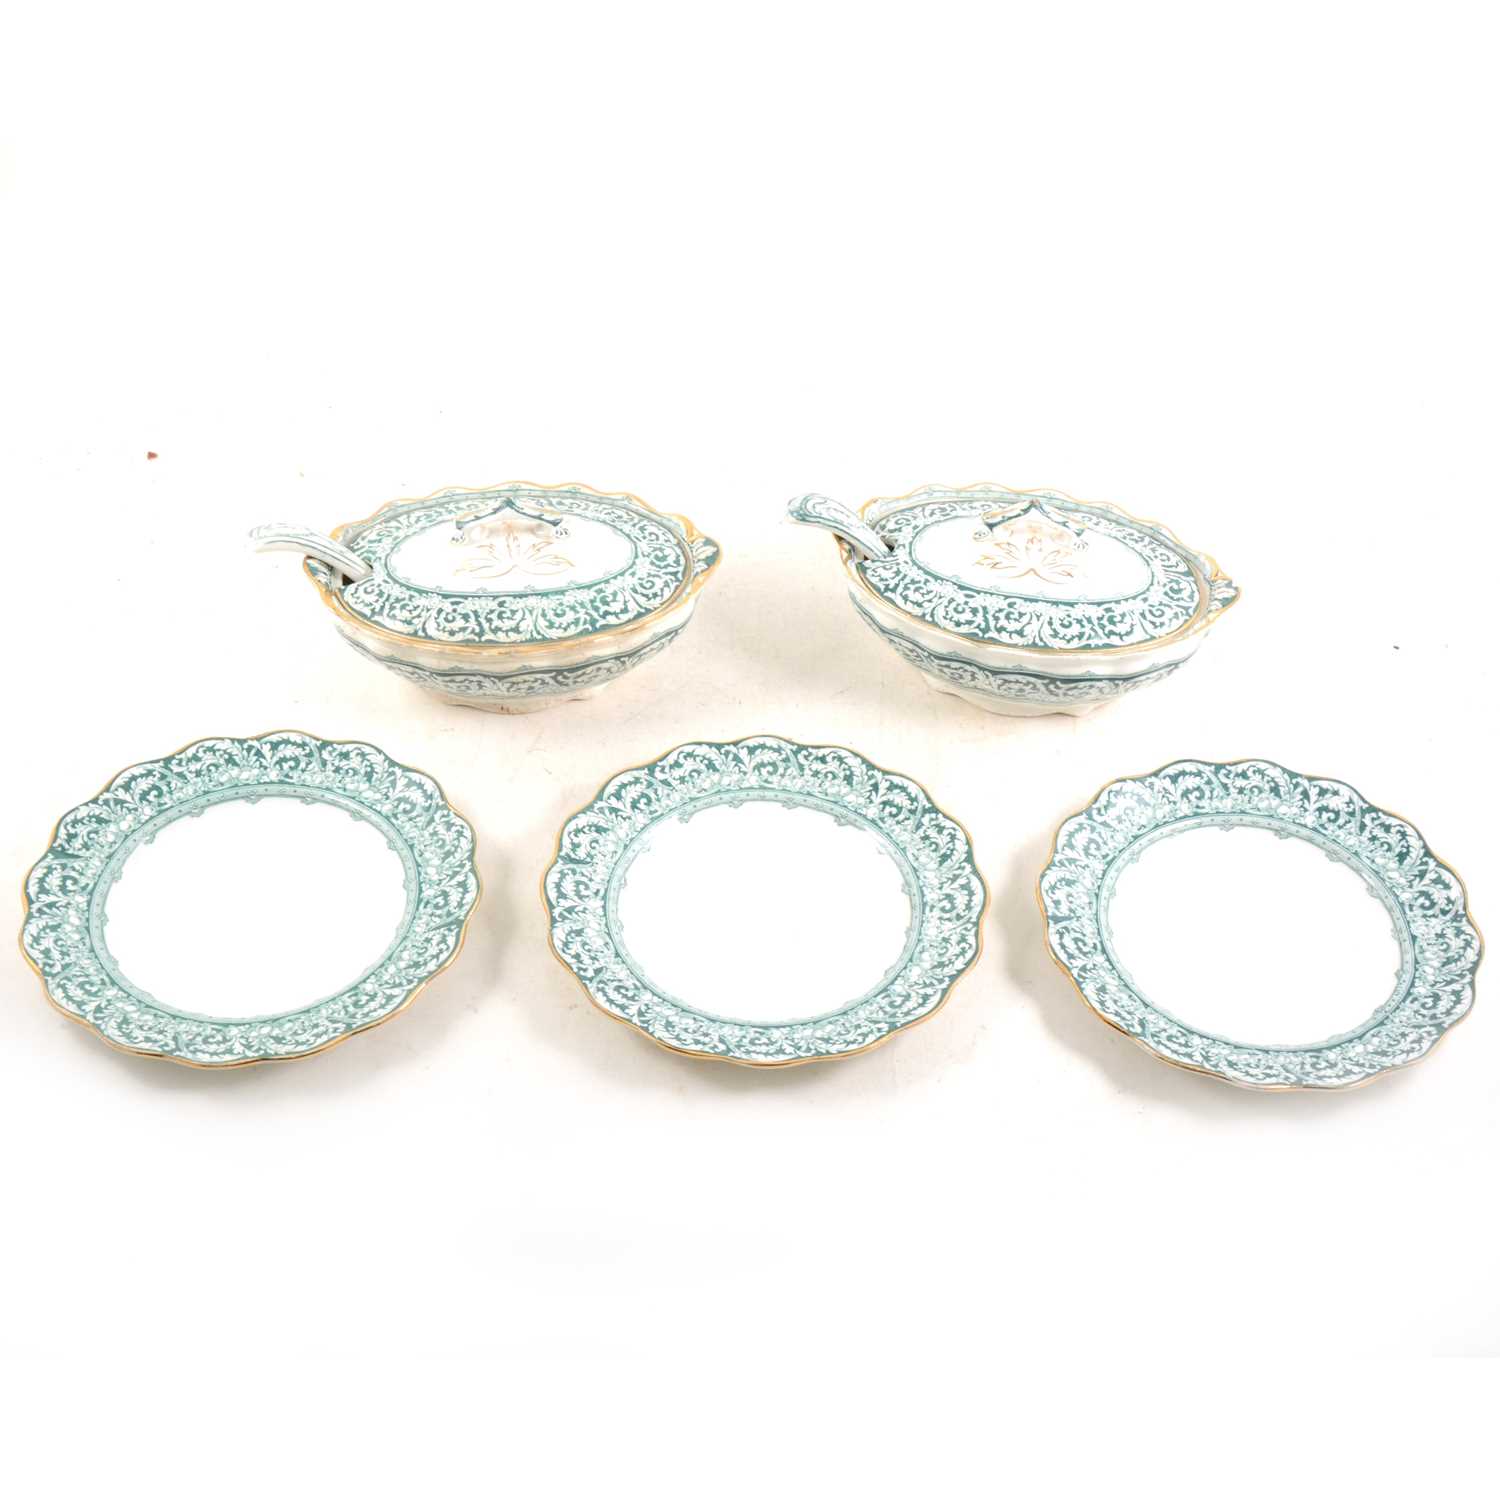 Lot 18 - A Royal Doulton dinner service in the Cremonia design.